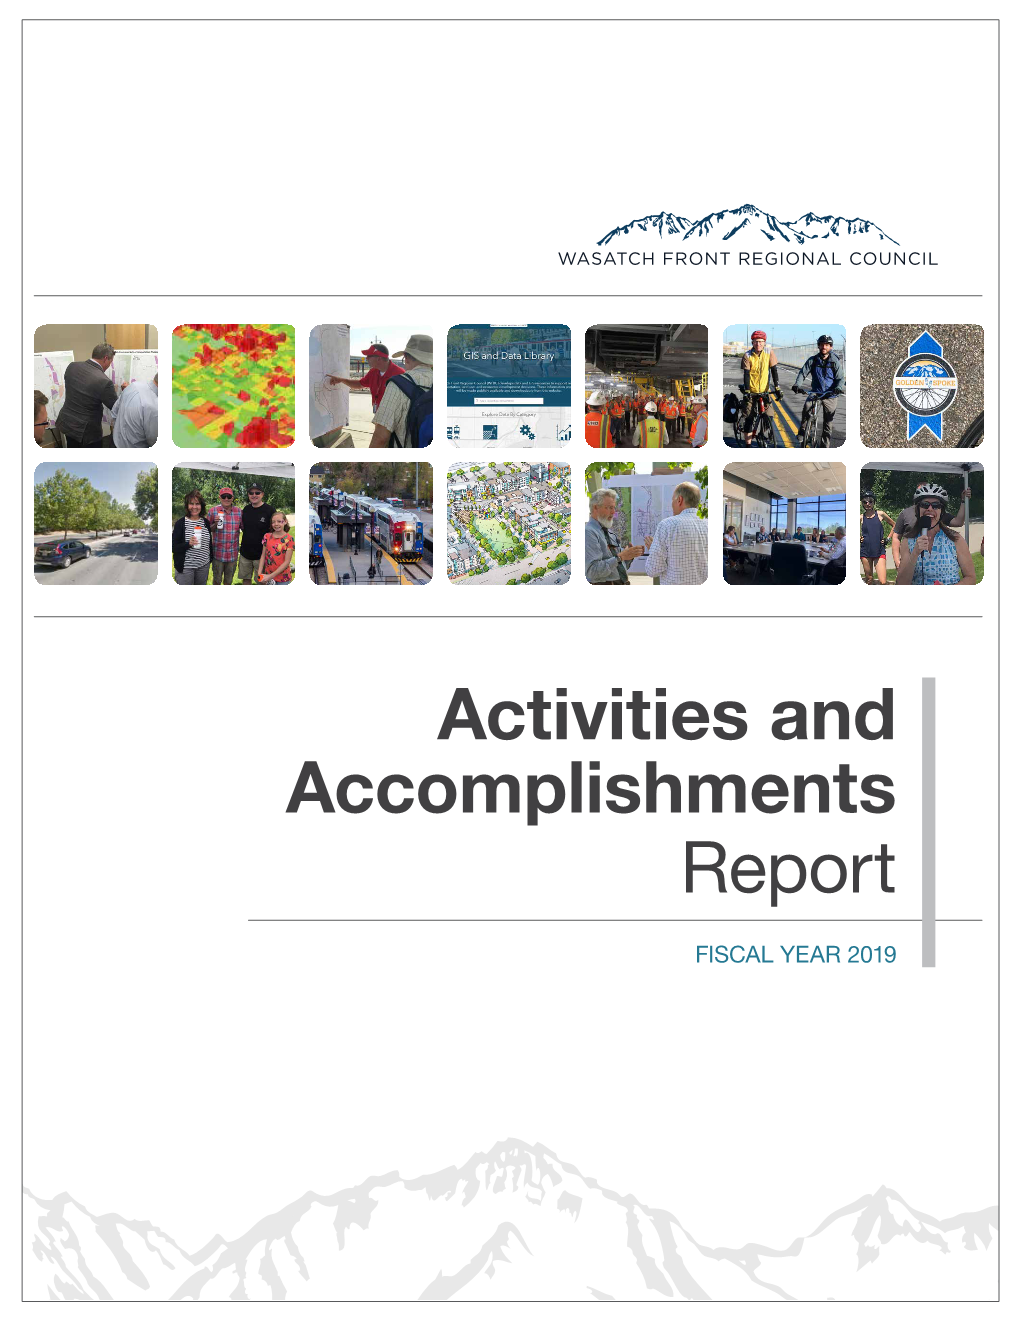 2019 Activities and Accomplishments Report